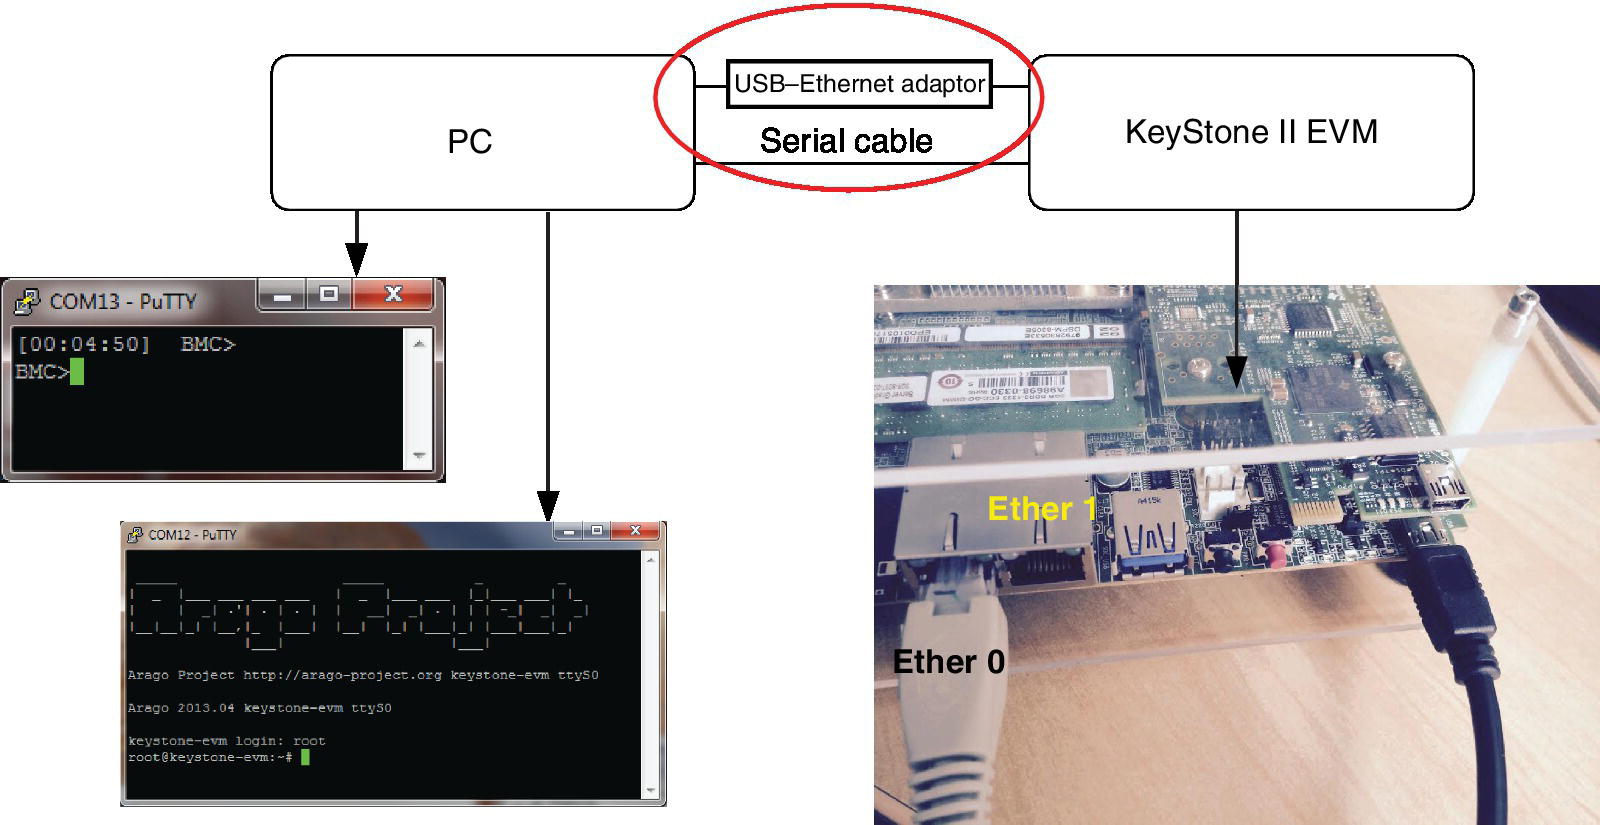 Schematic illustrating COM13-PuTTY and  COM12-PuTTY windows pointed by arrows from box labeled PC and photo pointed by an arrow from box labeled KeyStone II EVM. USB–Ethernet adaptor and serial cable encircled.